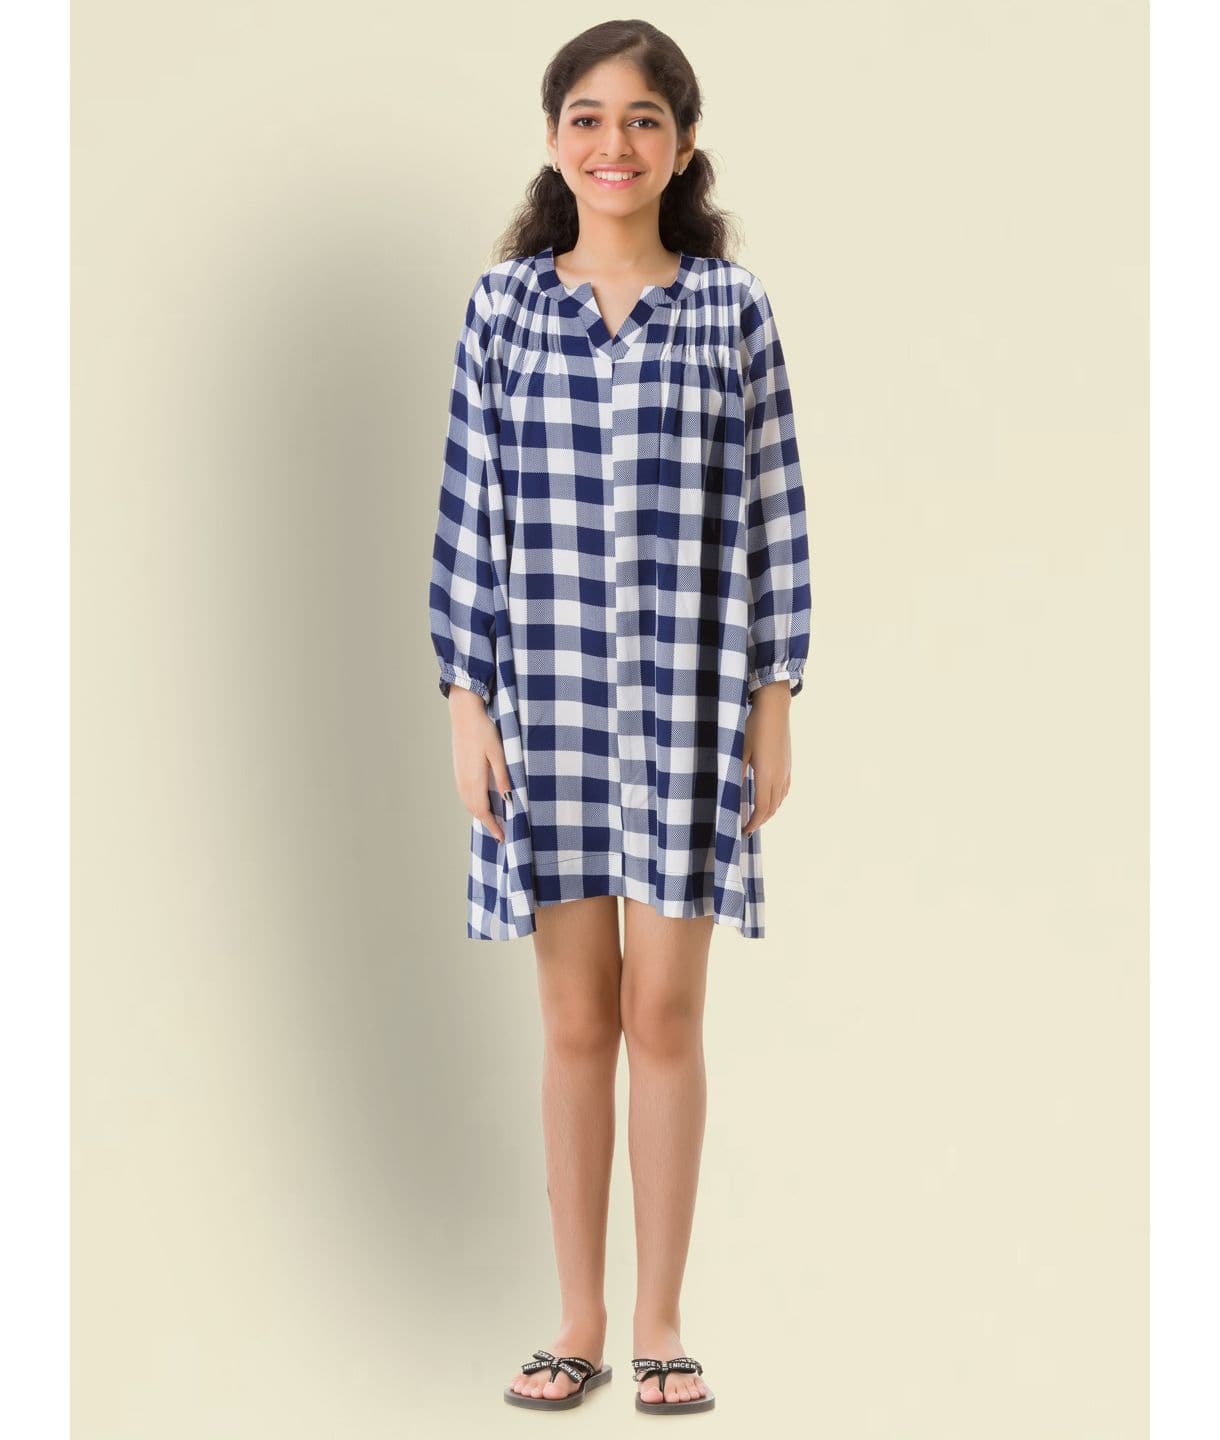 Checkered Printed Cotton 3/4th Sleeves Dress for Girls - Uptownie